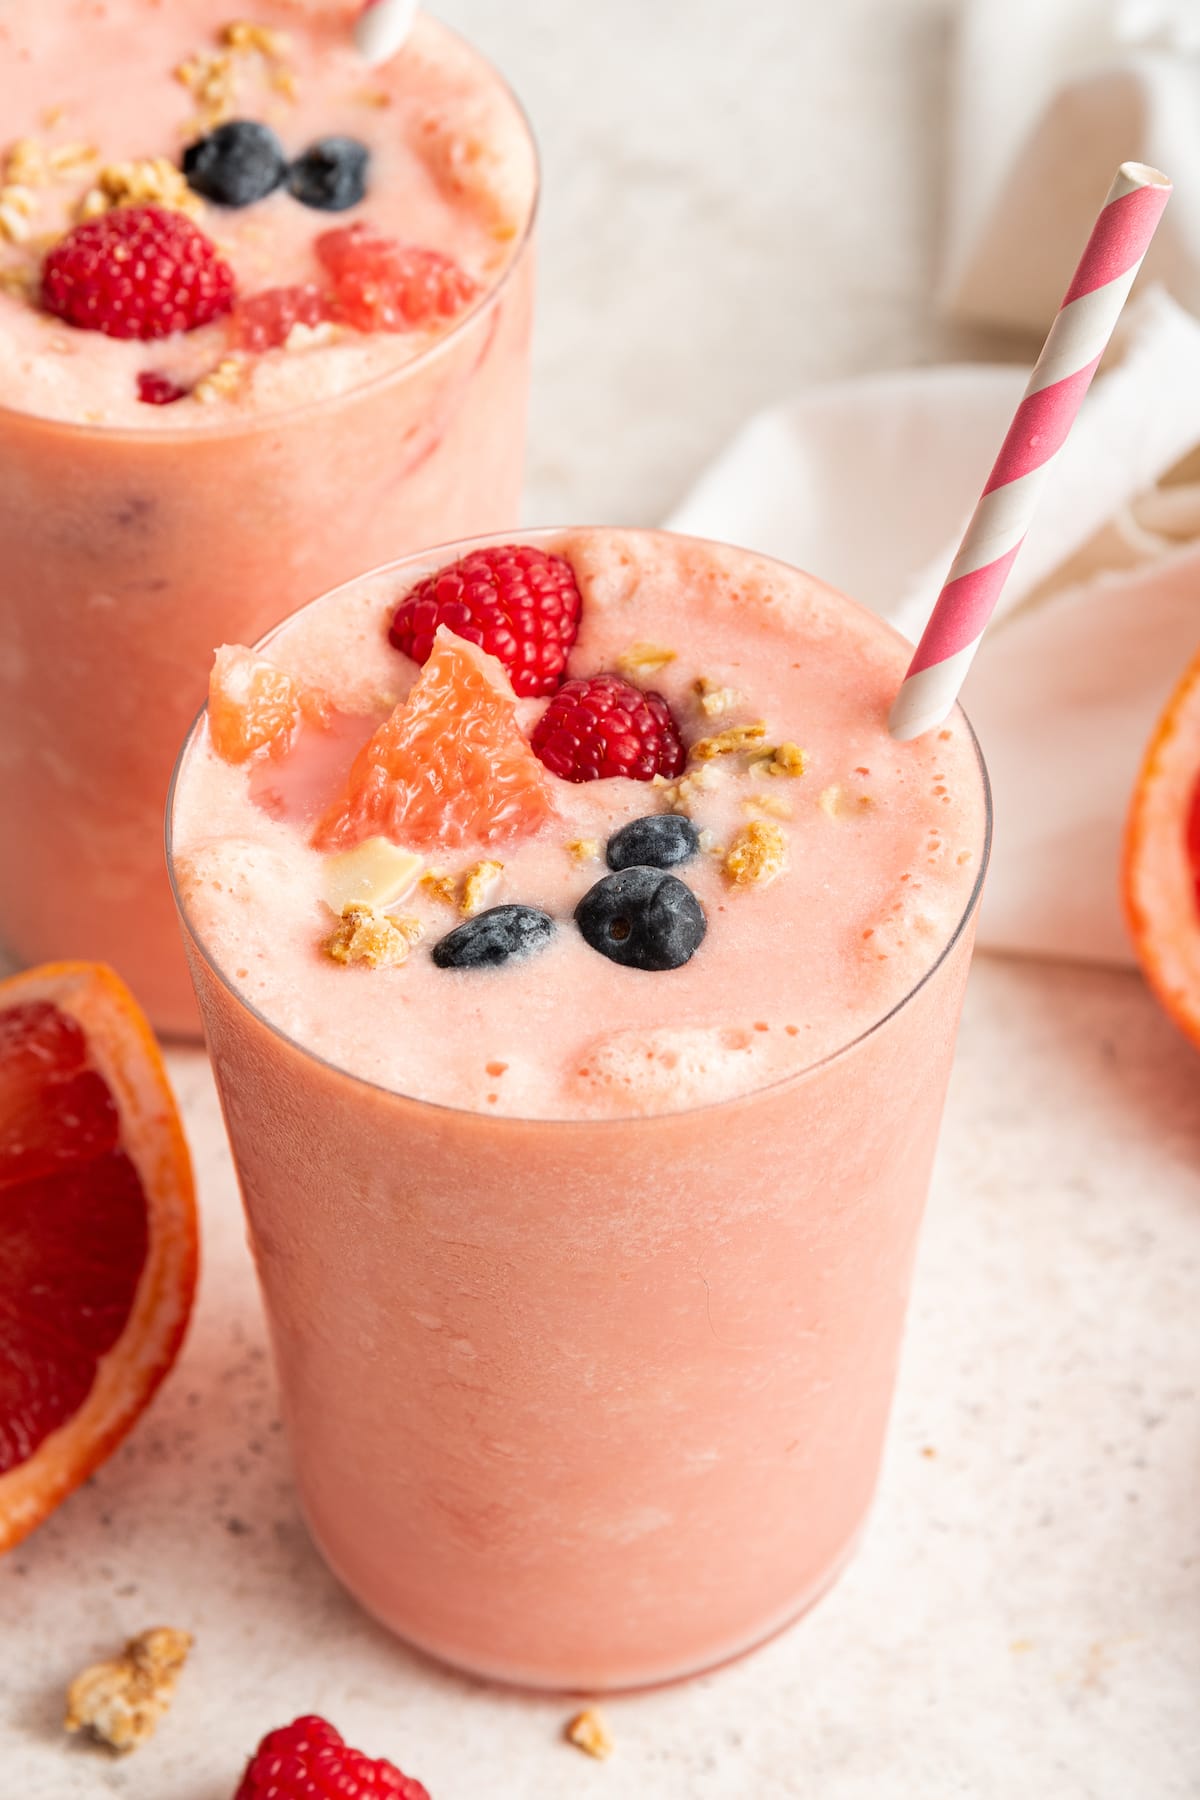 Grapefruit smoothie topped with fresh berries, grapefruit and granola.